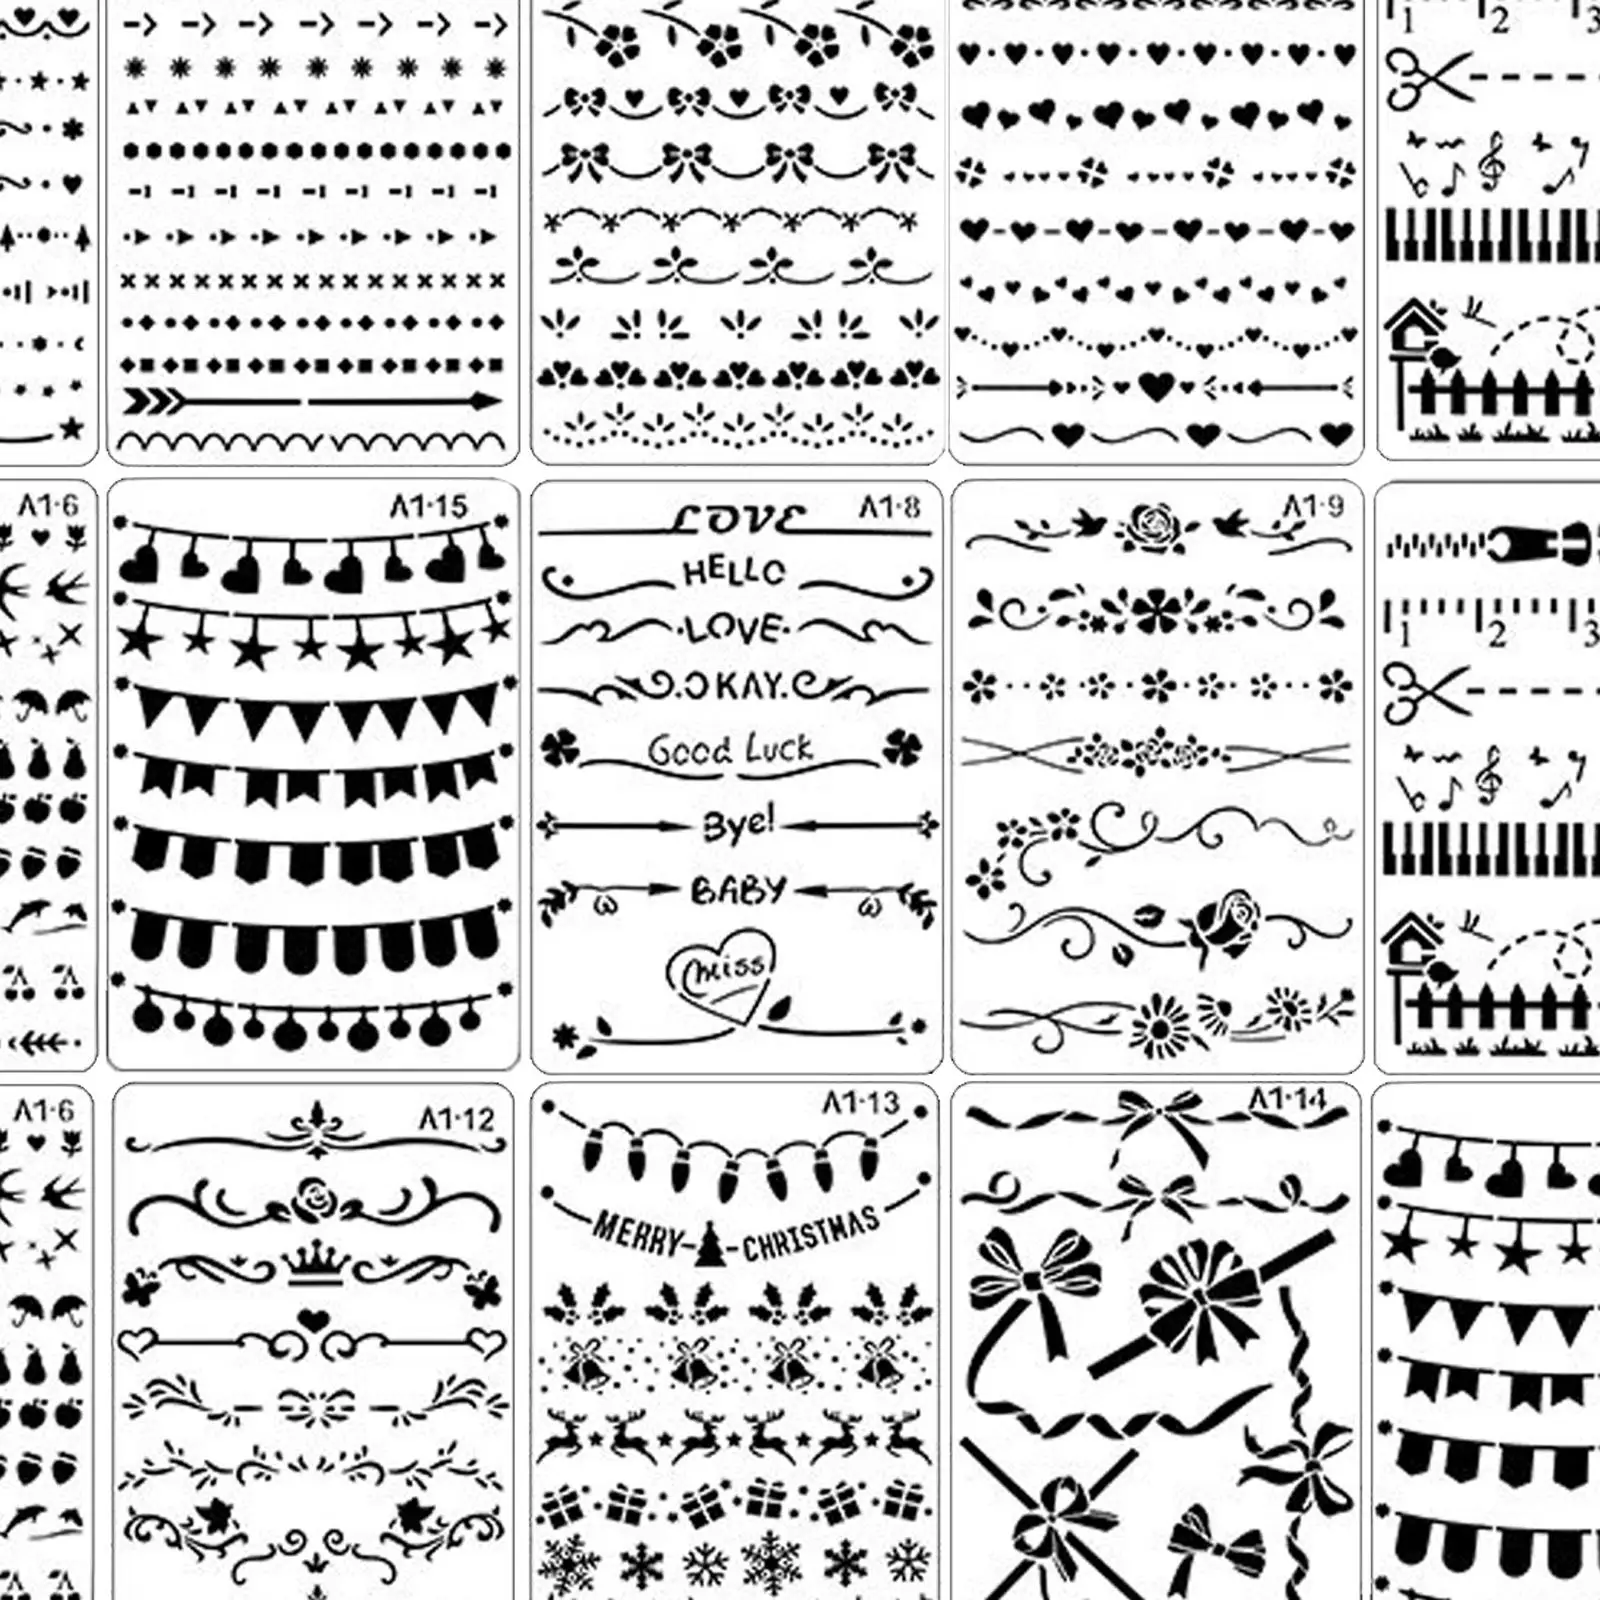  Template Craft Supplies Stencil Lace for Tracing Painting Photo Album Crafting Card Making Diary Decorative